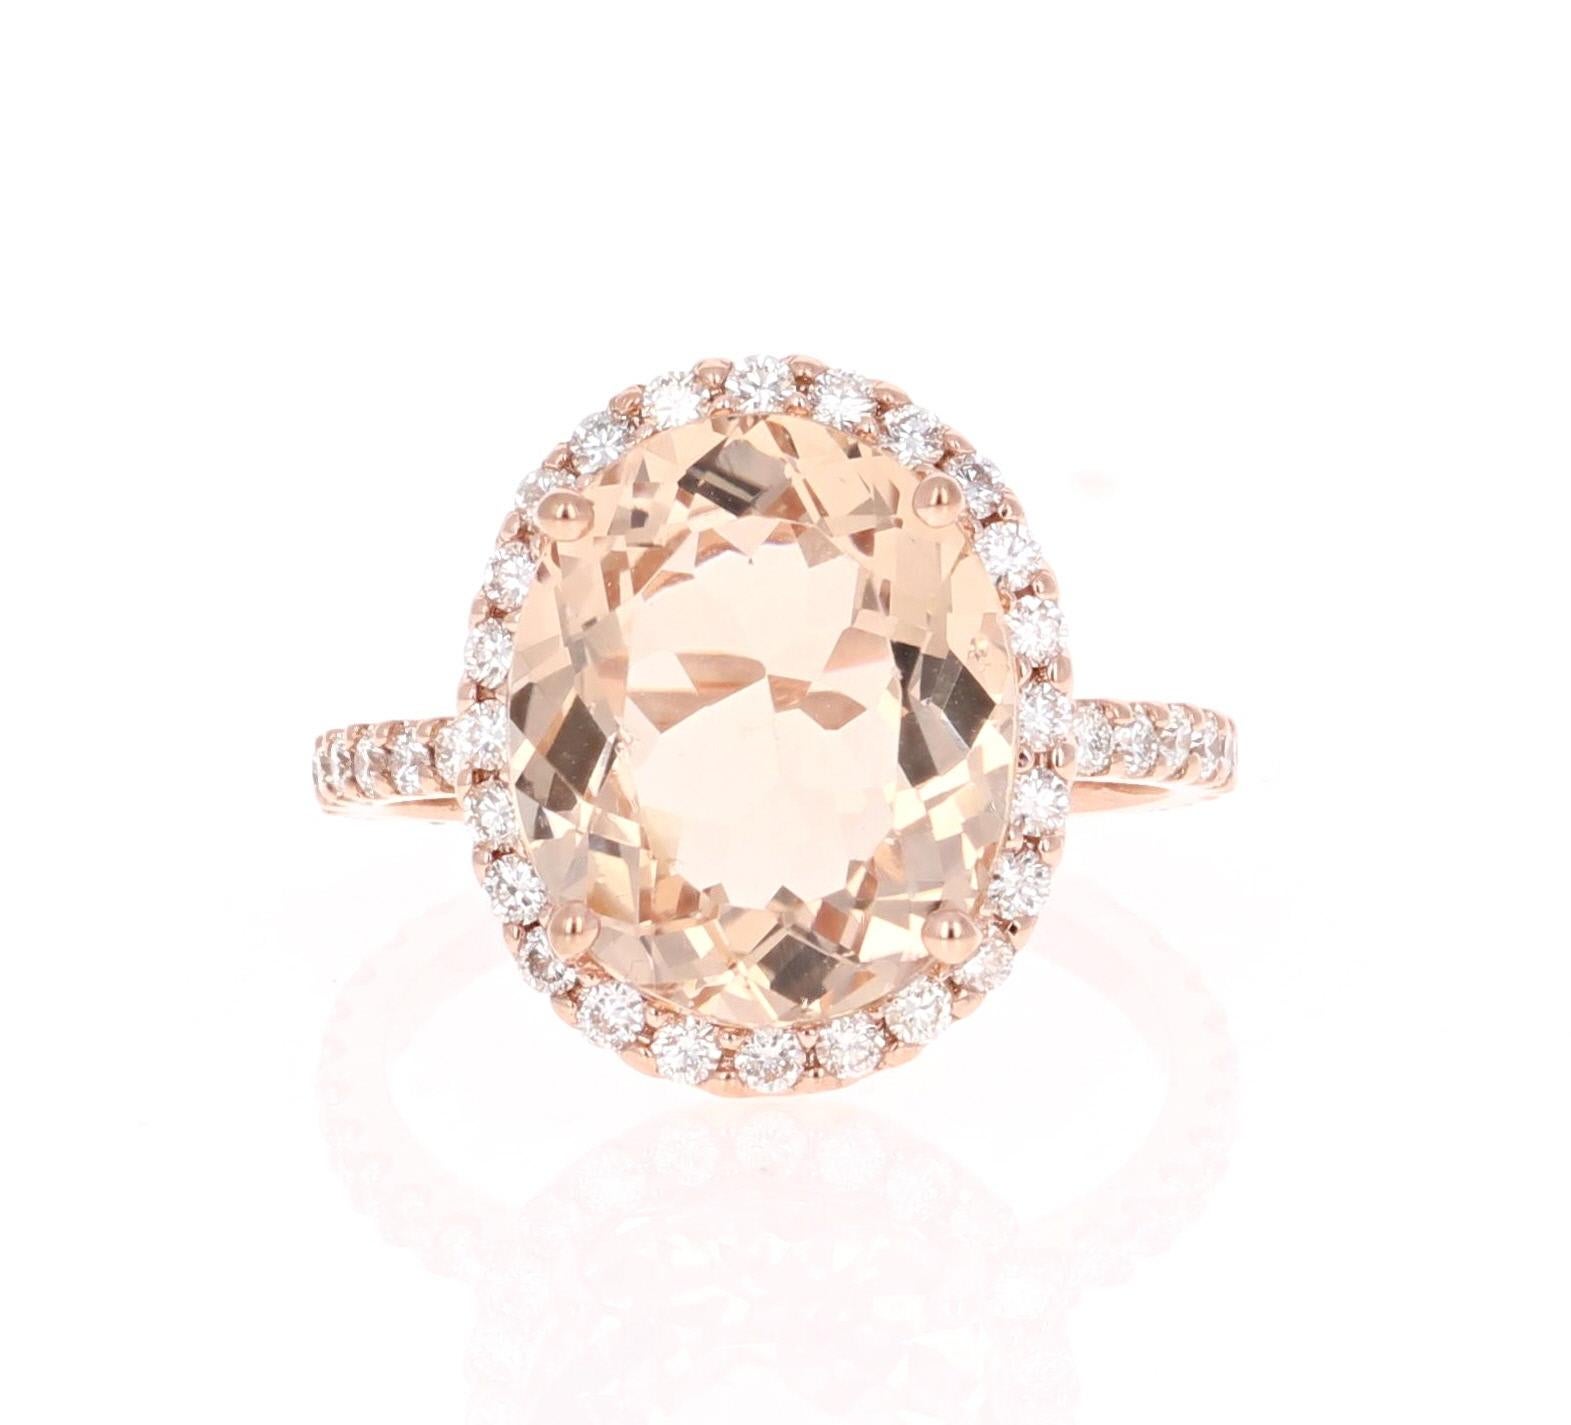 This gorgeous and classy Morganite Ring can easily substitute for a unique and edgy Engagement or Promise ring for that special someone.  

It has a 6.73 Carat Oval Cut Morganite as its center and is surrounded by a Halo of 48 Round Cut Diamonds